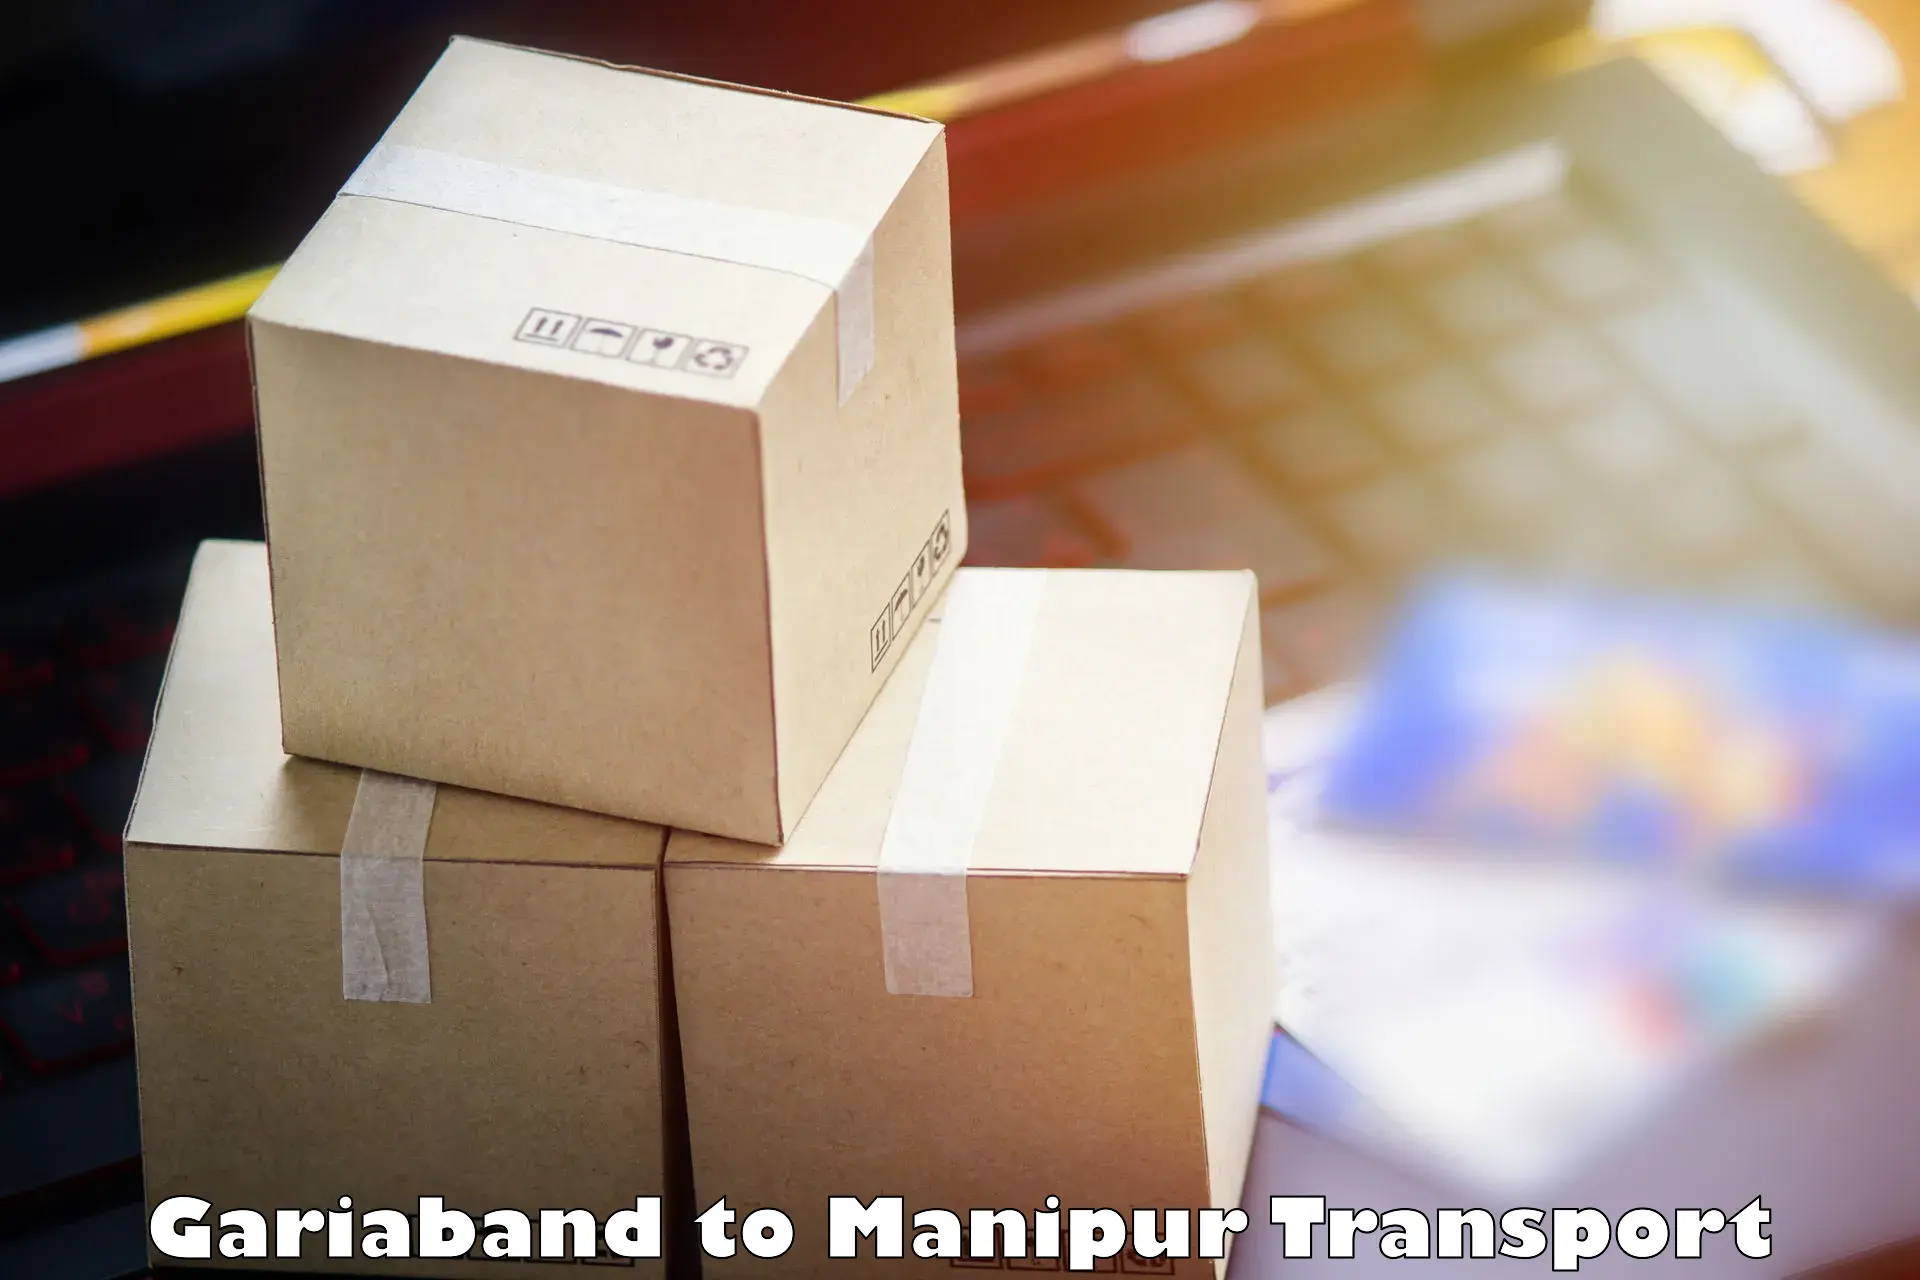 Vehicle transport services Gariaband to Manipur